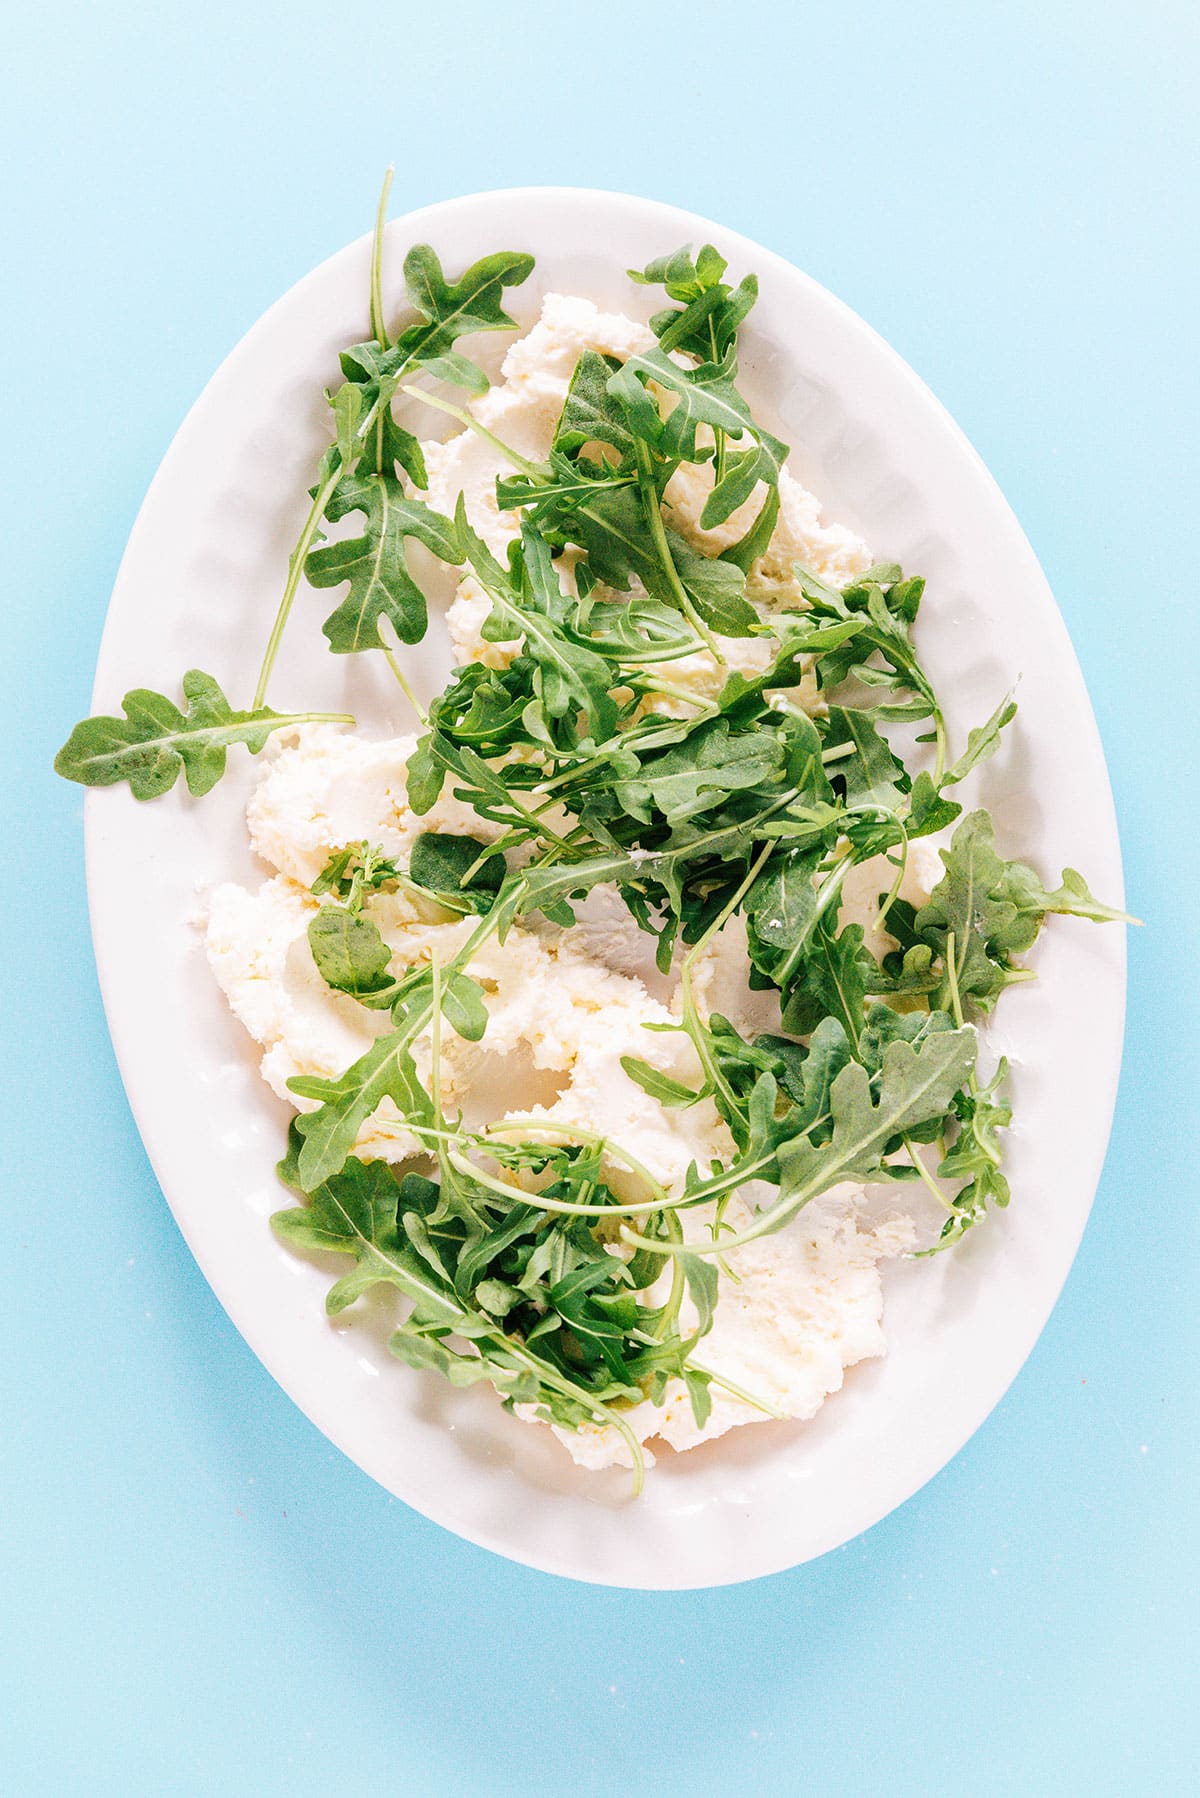 A platter with whipped feta and arugula.